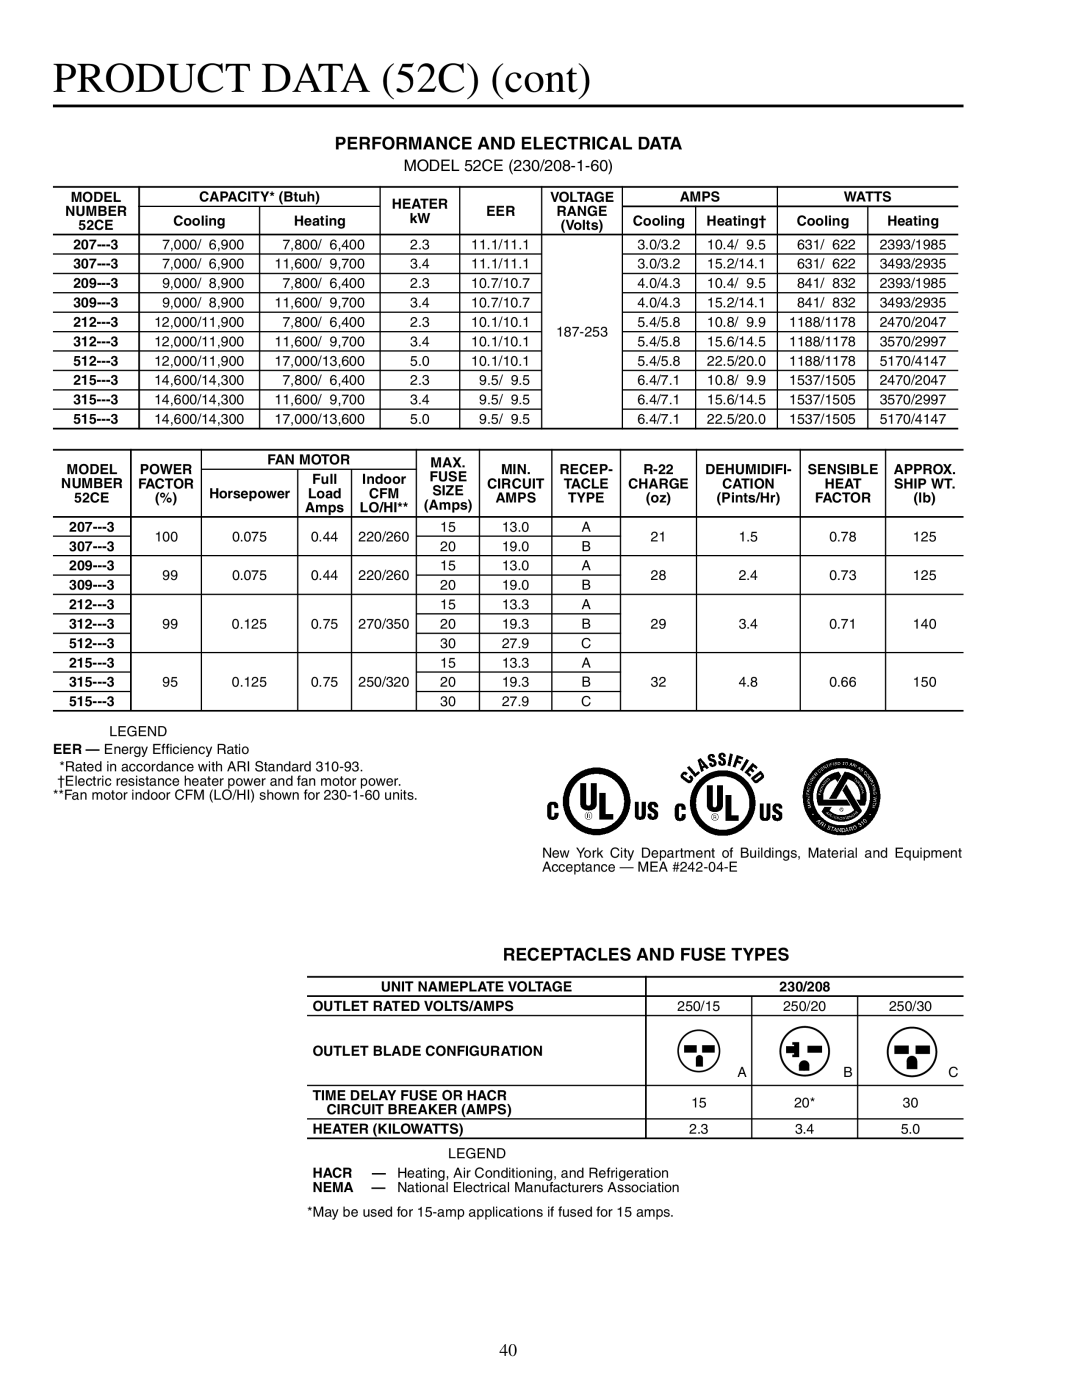 Carrier 592-085 warranty PRODUCT DATA 52C cont, Performance And Electrical Data, Receptacles And Fuse Types 